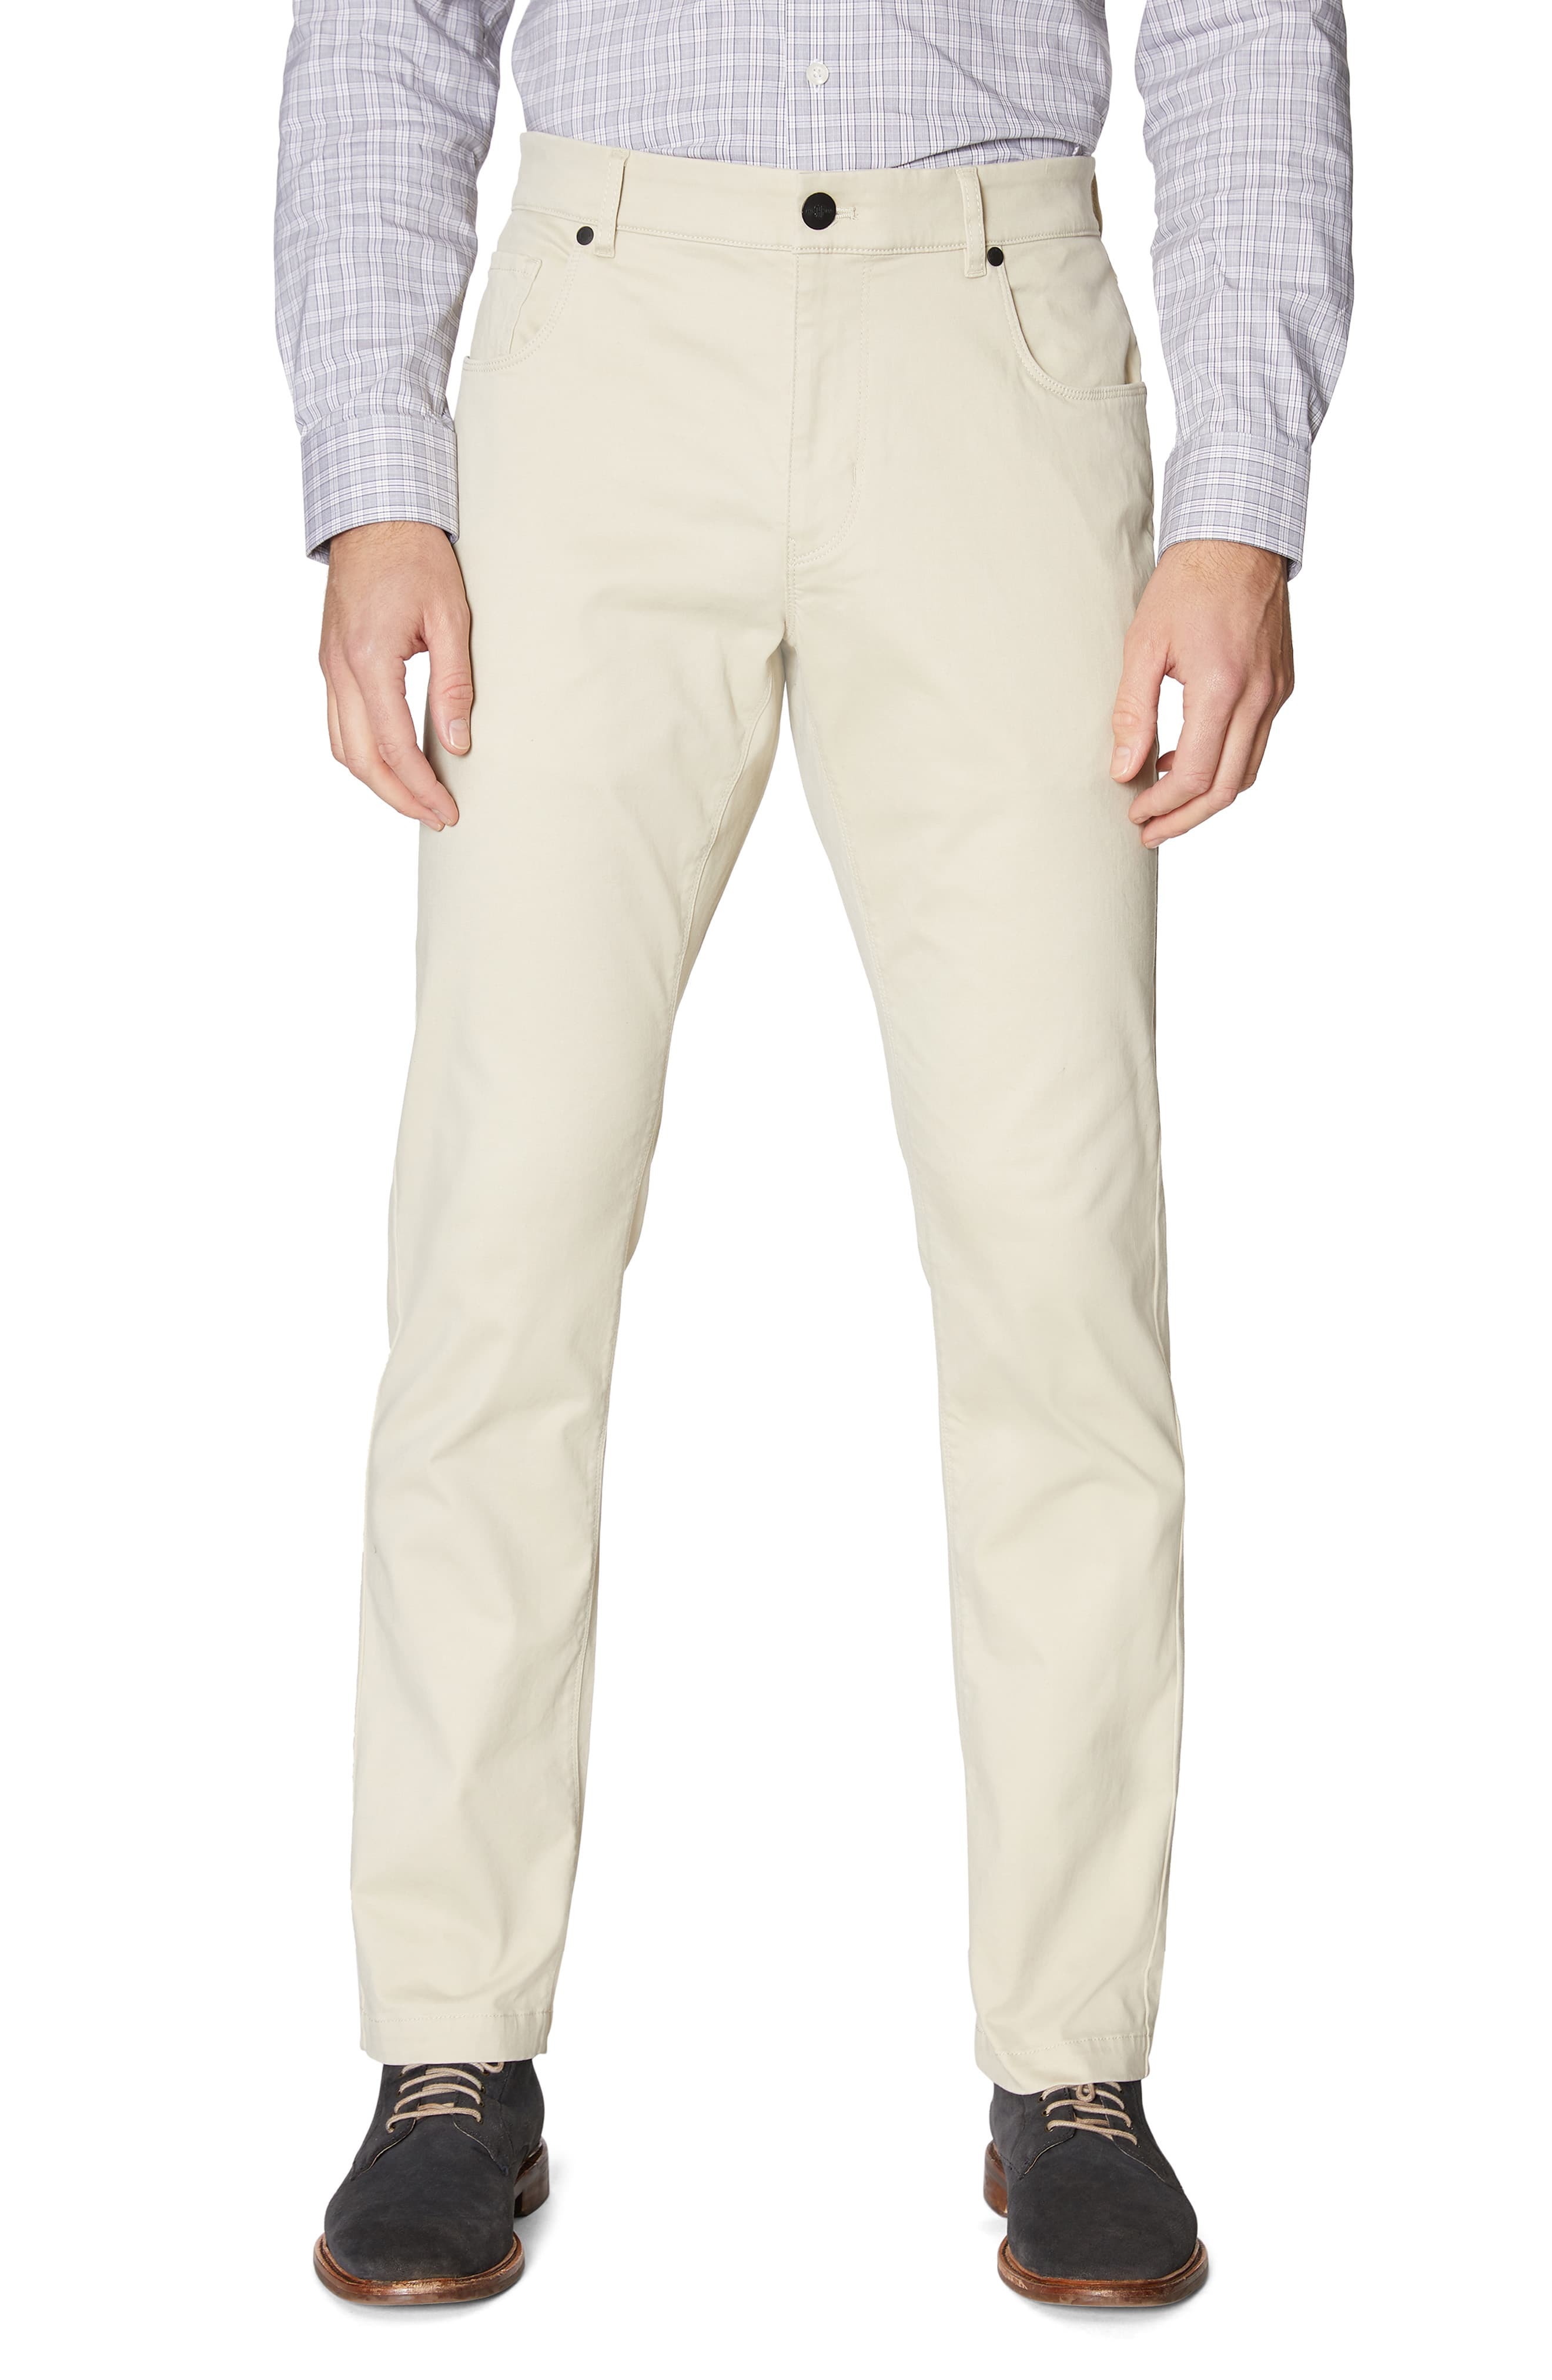 Hickey Freeman Core Stretch Cotton Pants, $62 | Nordstrom | Lookastic